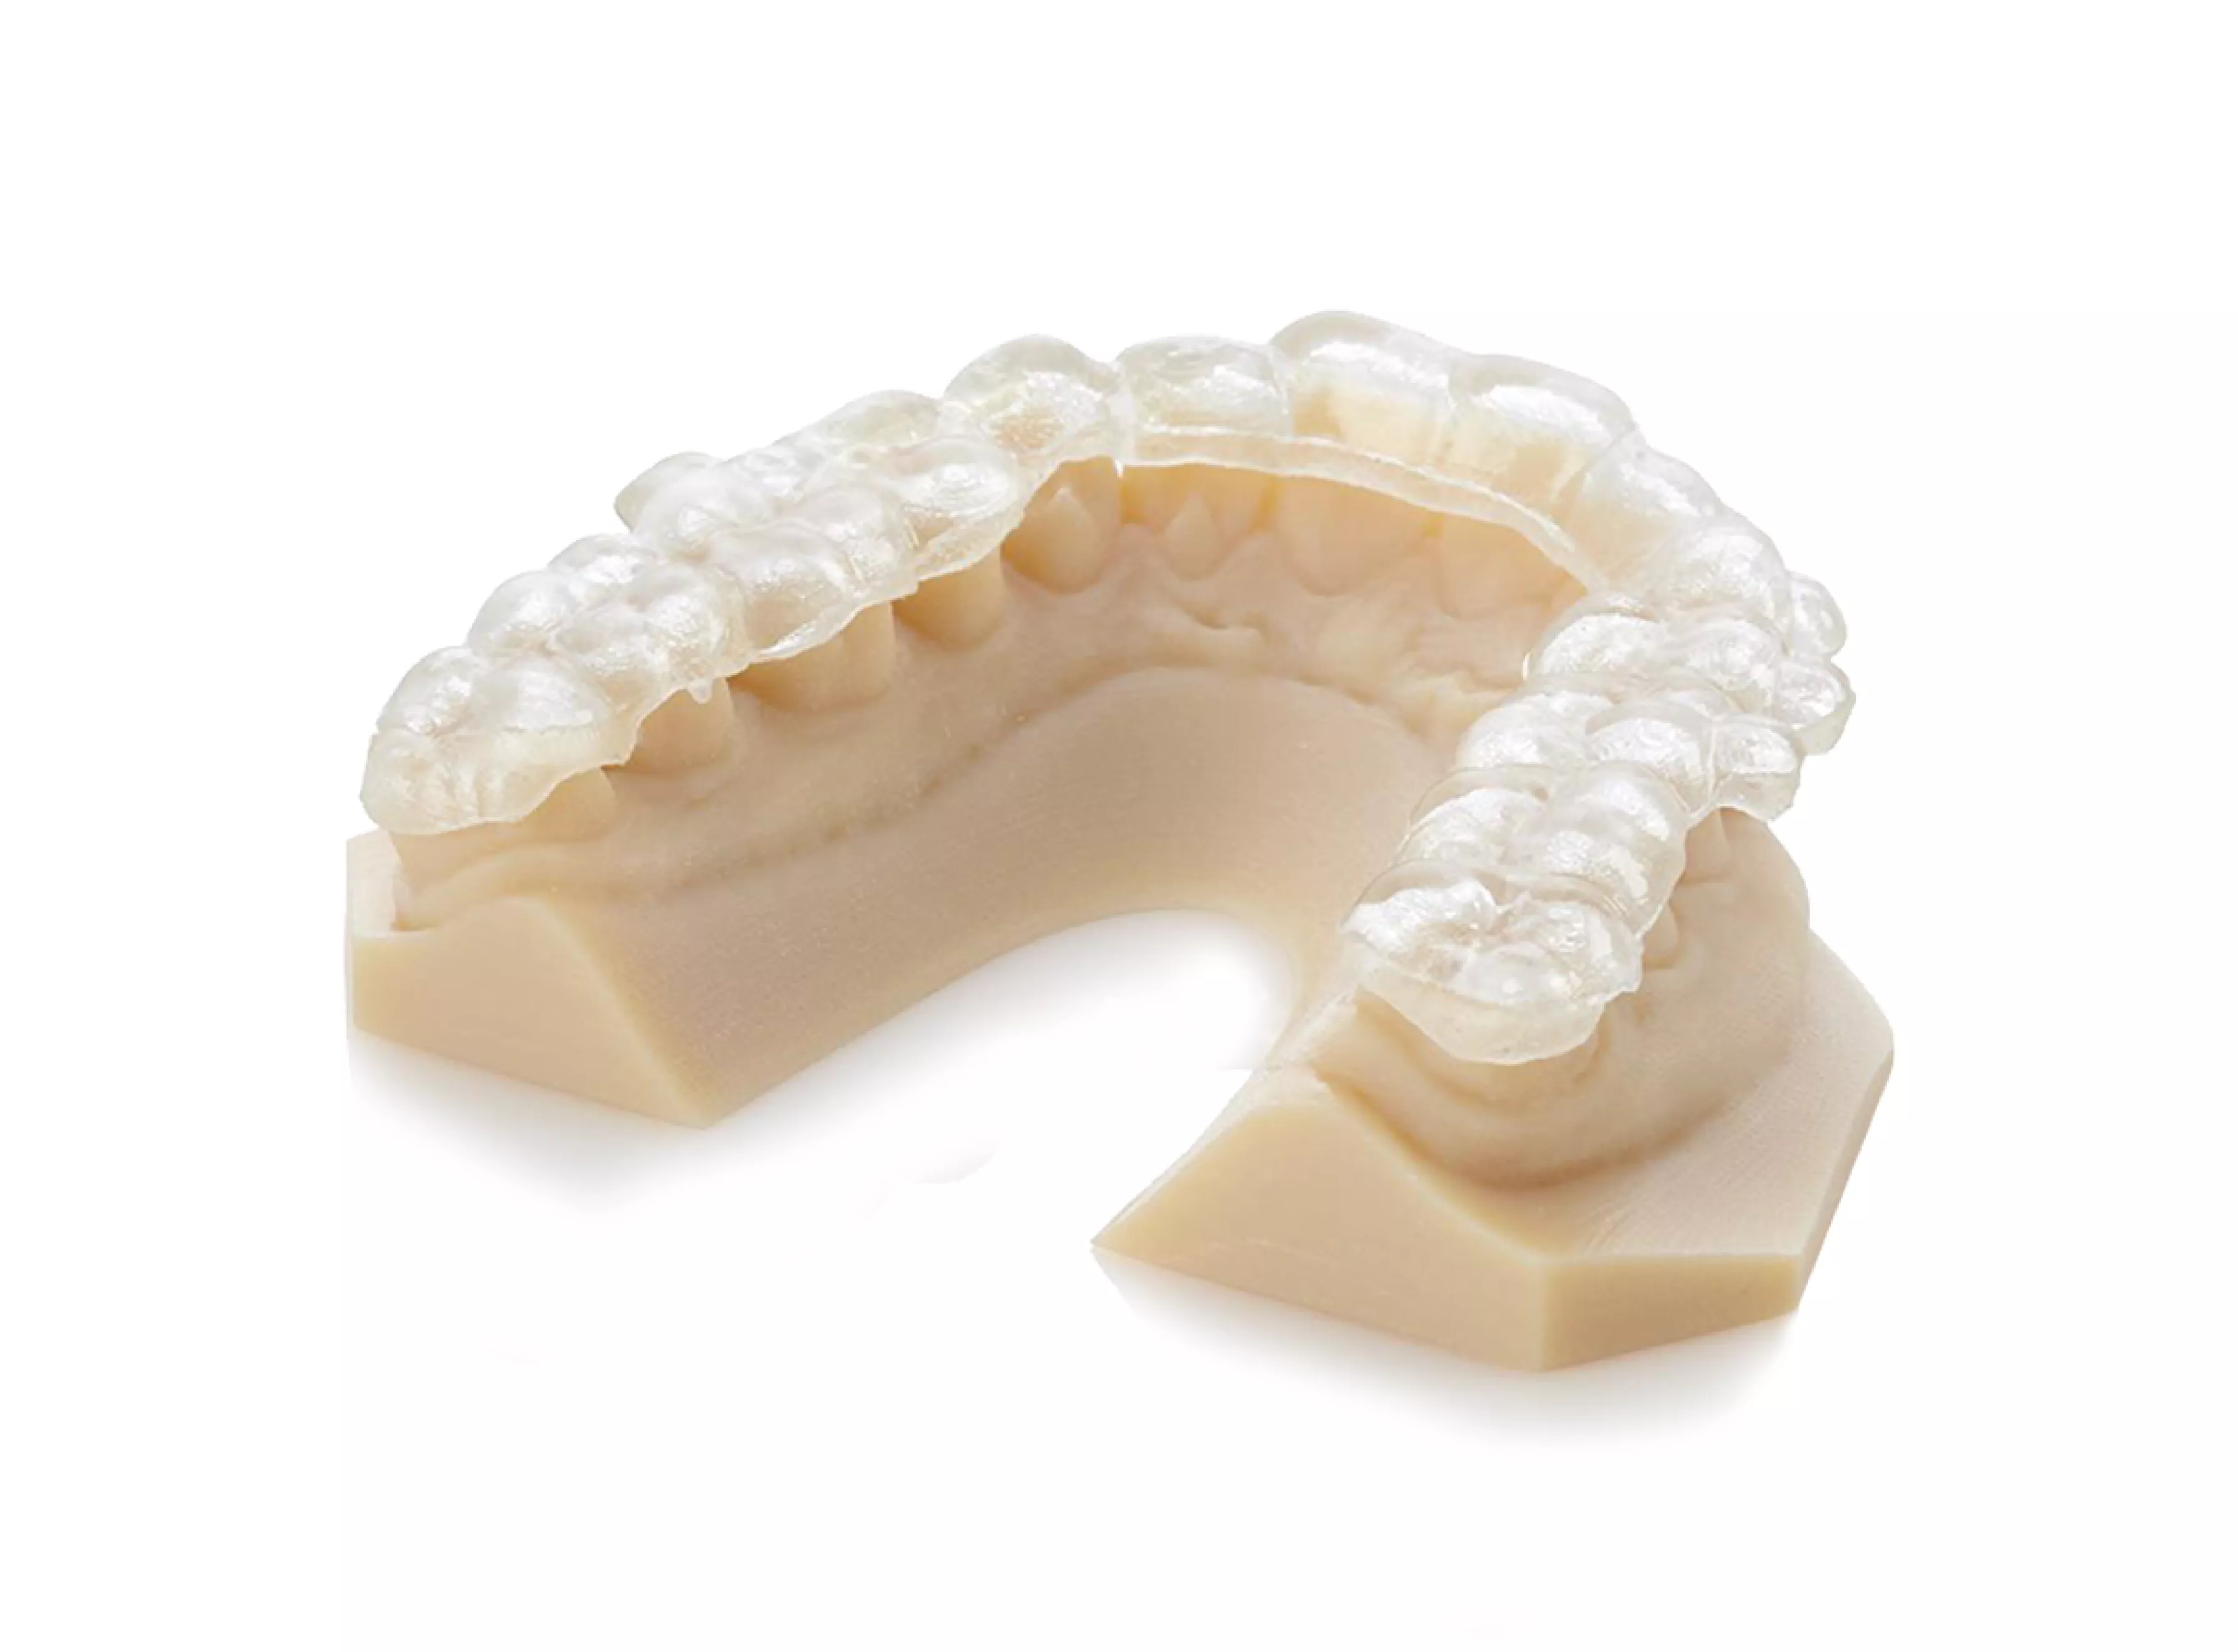 Implantology dental 3D printed surgical guide from Stratasys